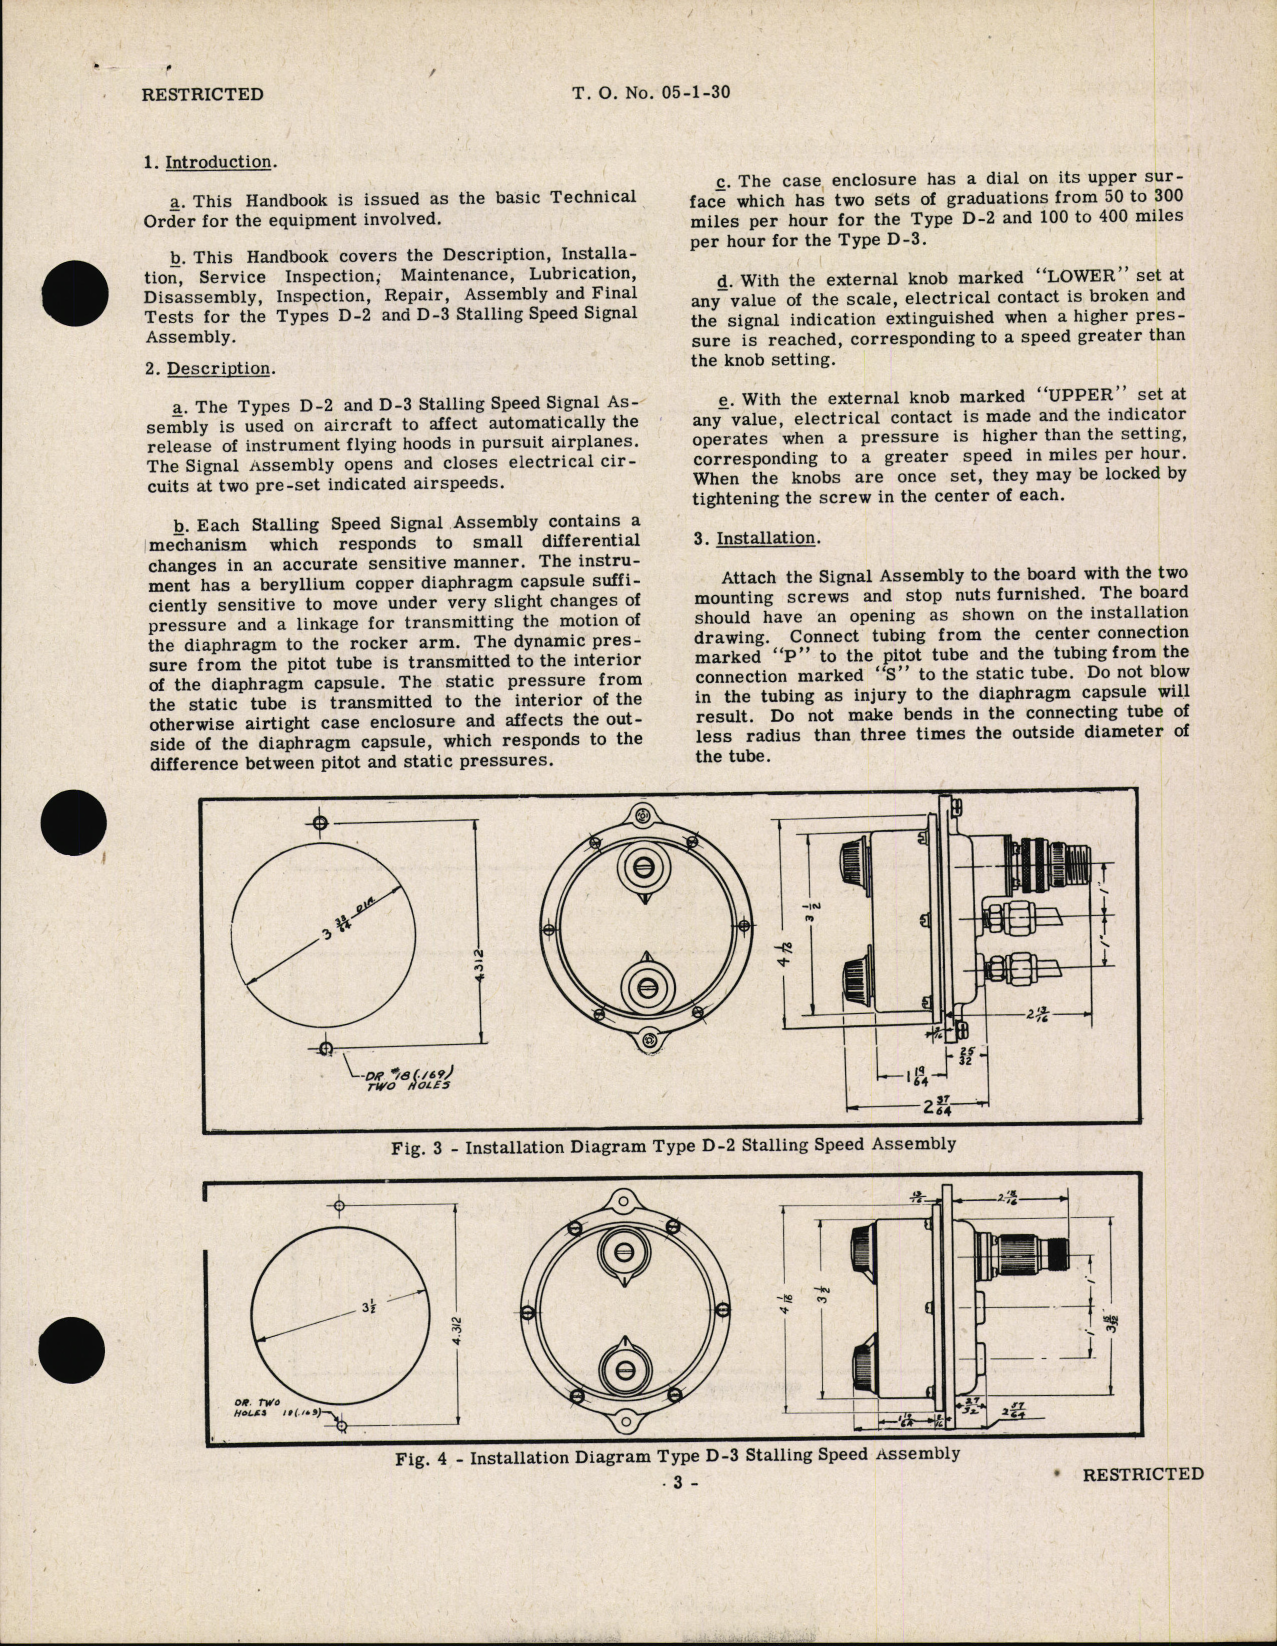 Sample page 5 from AirCorps Library document: Handbook of Instructions with Parts Catalog for Stalling Speed Signal Assembly